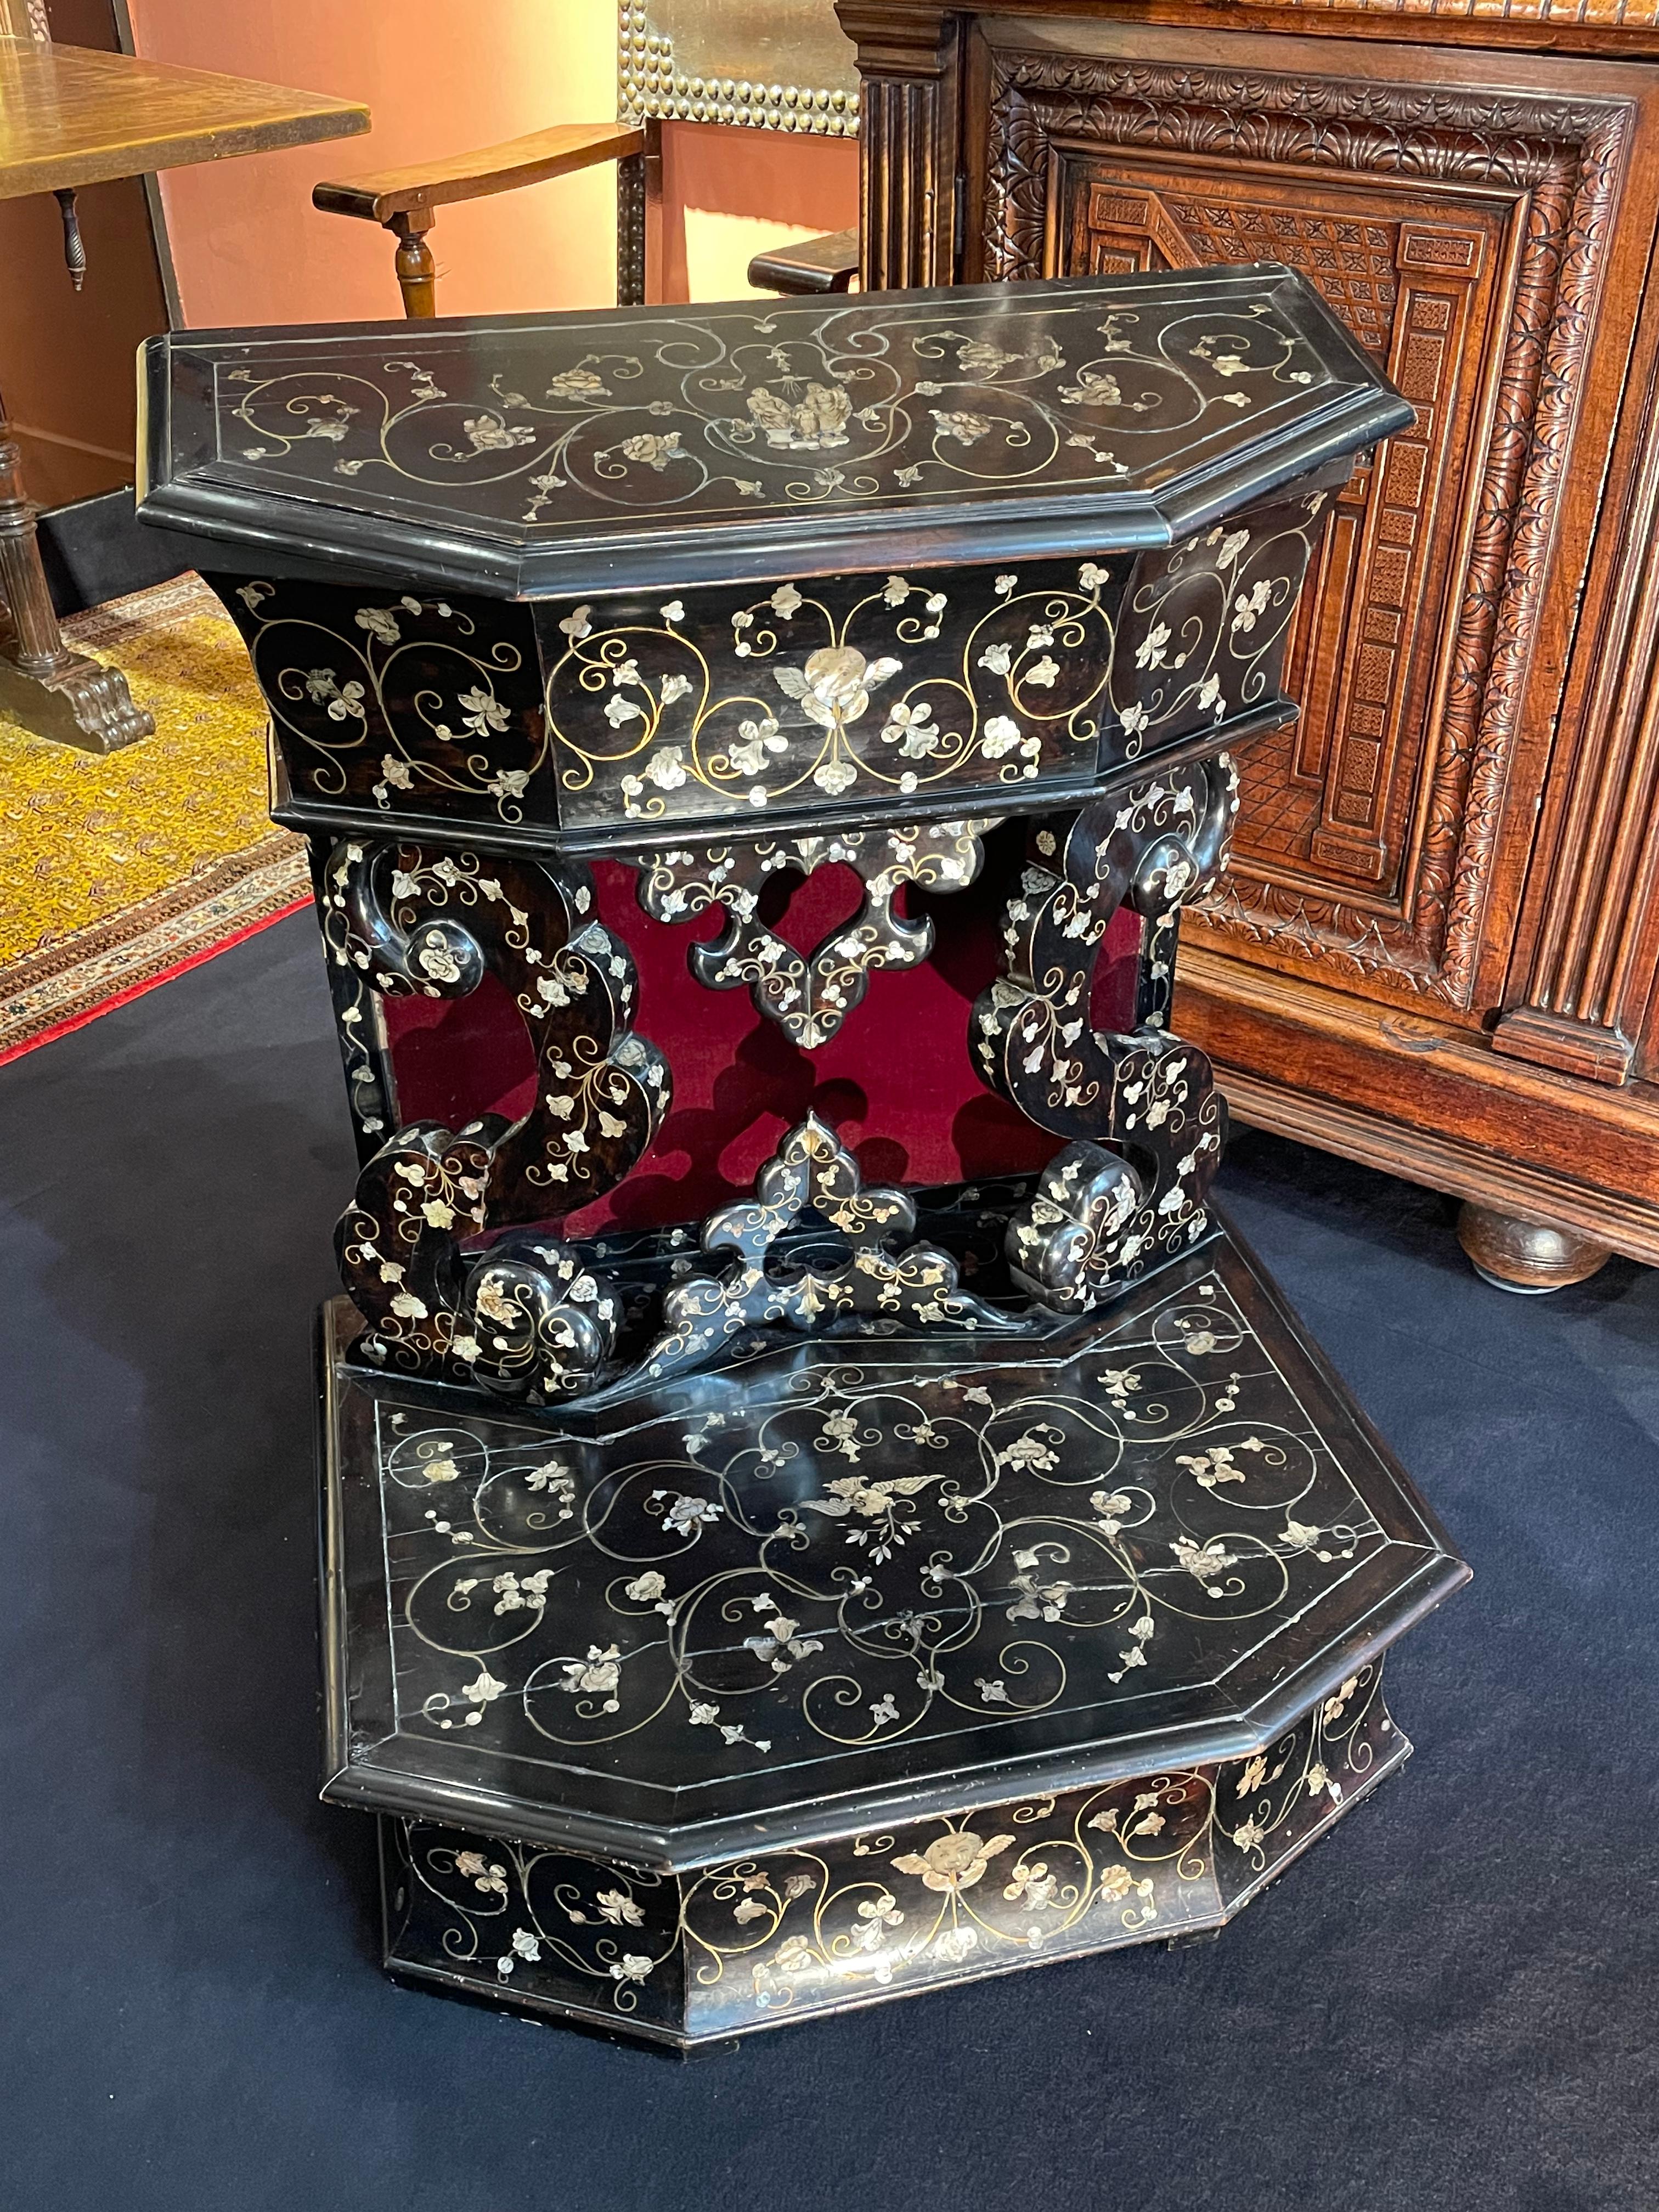 Italian Prie-Dieu inlaid with mother-of-pearl.

ORIGIN : VENICE, ITALY
PERIOD : END OF THE XVII CENTURY, AROUND 1680

Height : 90,5cm
Width : 72,5cm
Depth : 53cm 


This impressing blackened wooden prie-dieu is a perfect exemple of